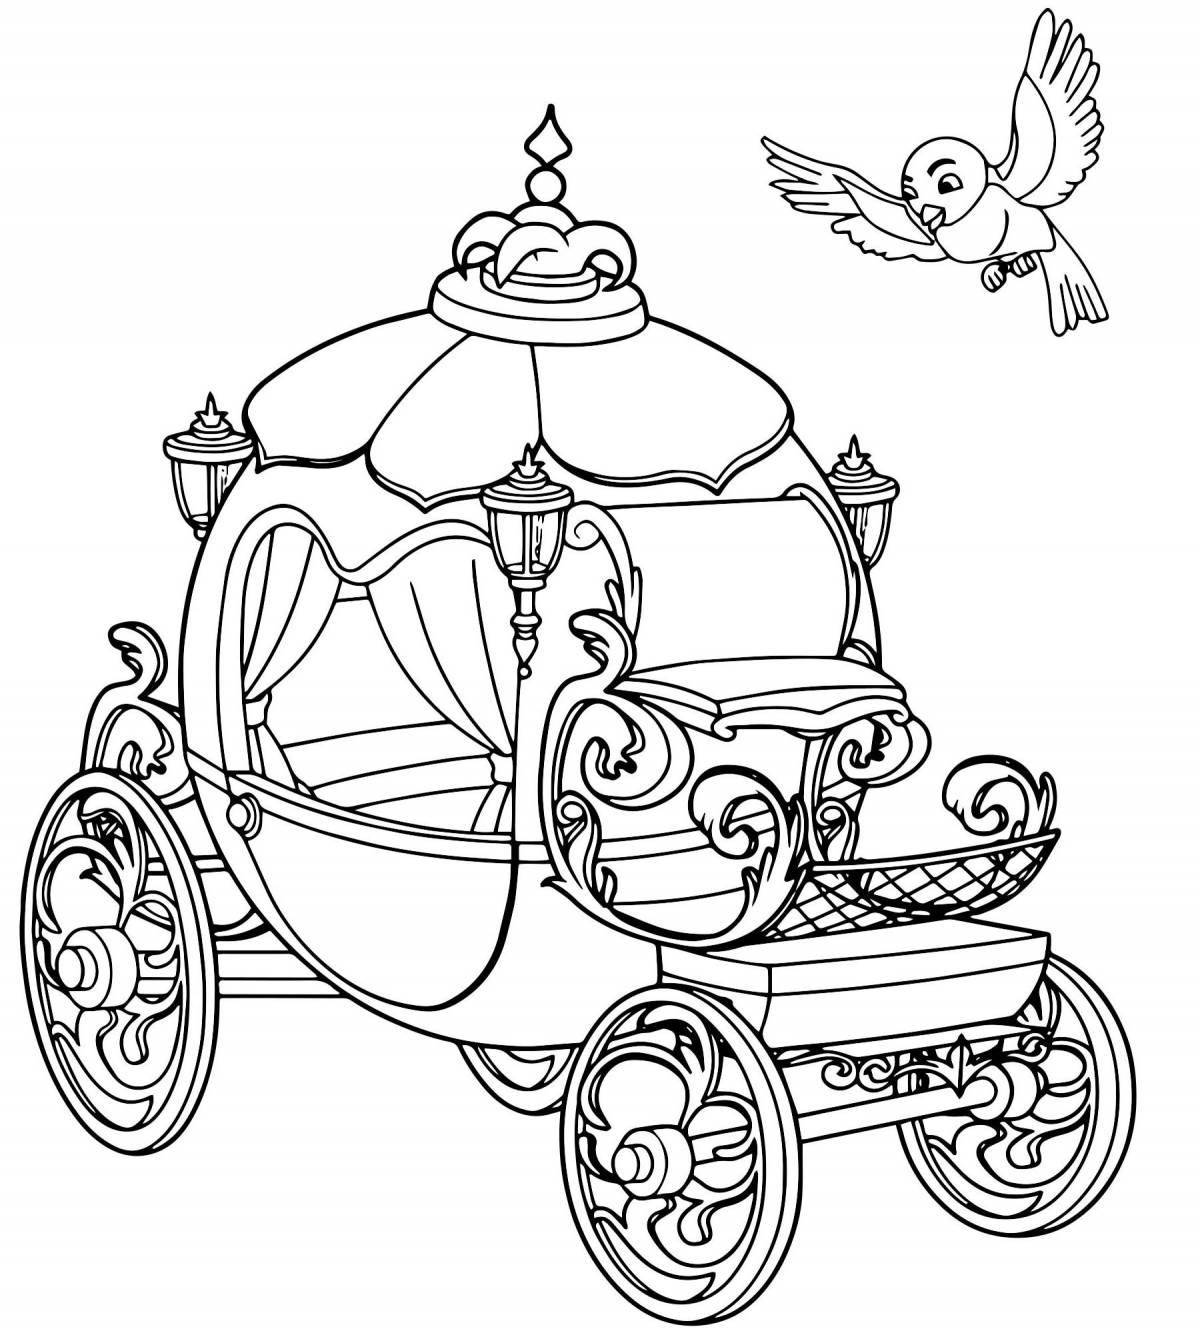 Great horse carriage coloring book